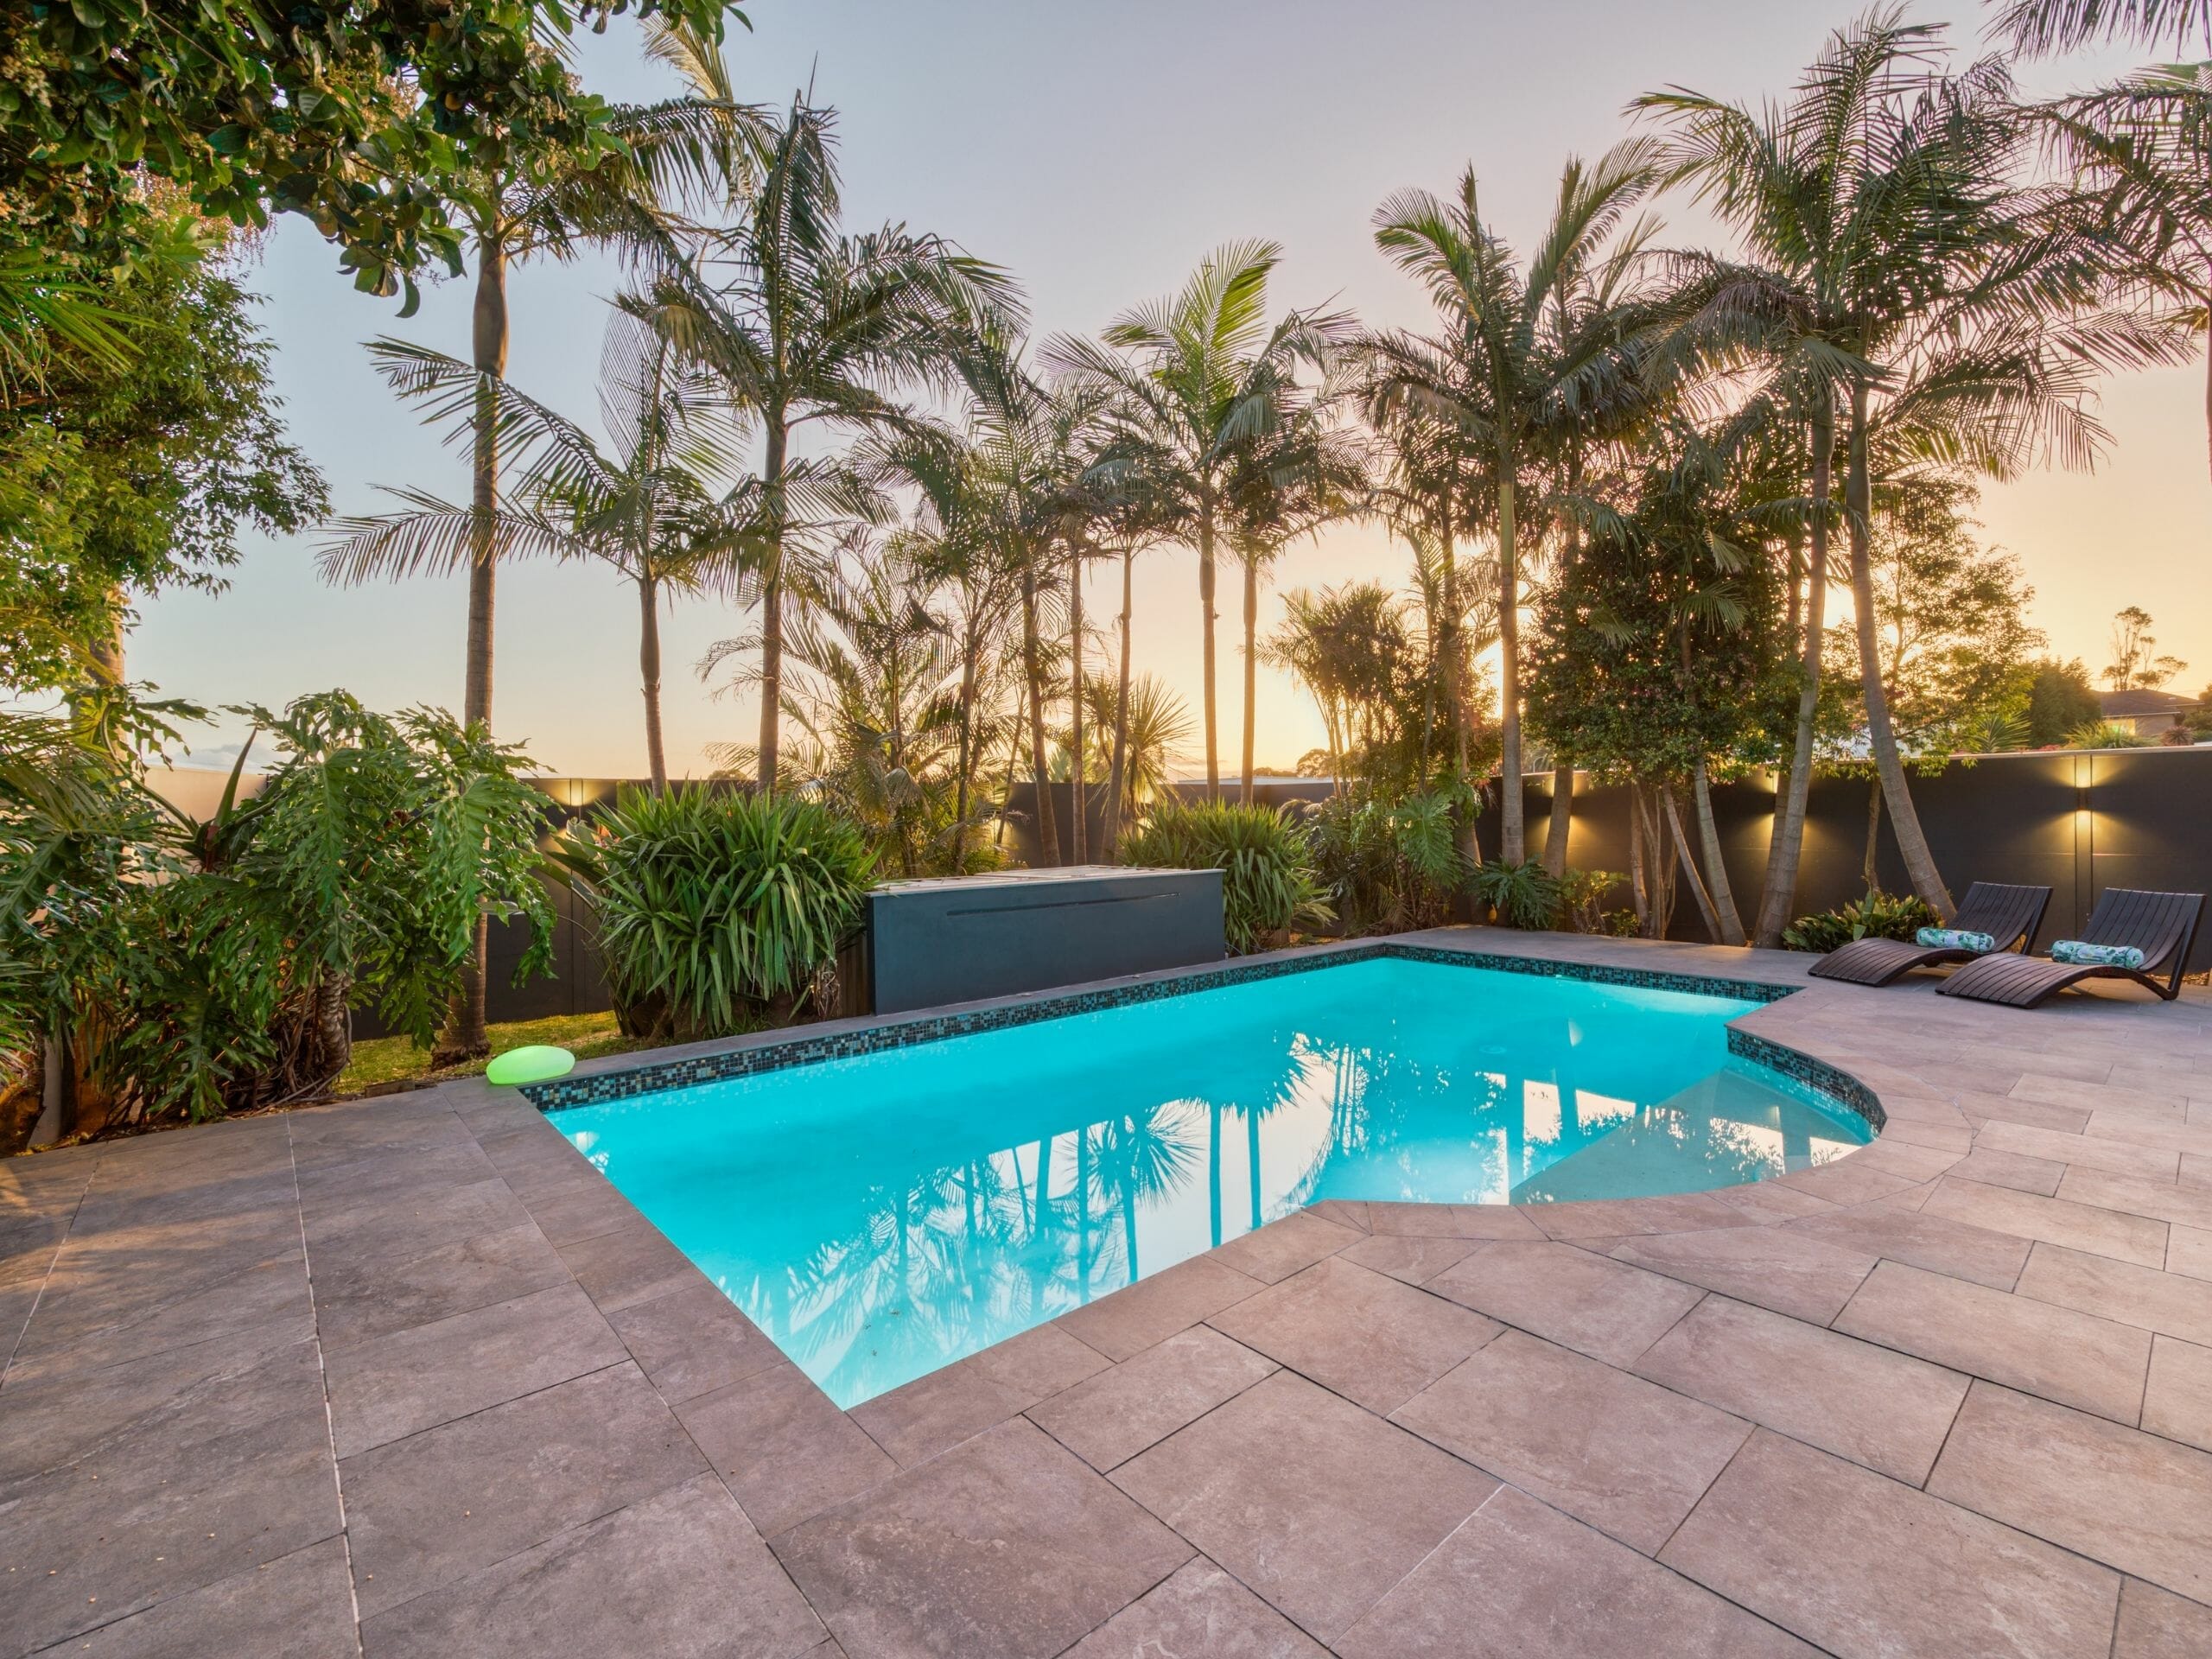 TrendWall is the ideal choice for coastal or poolside applications